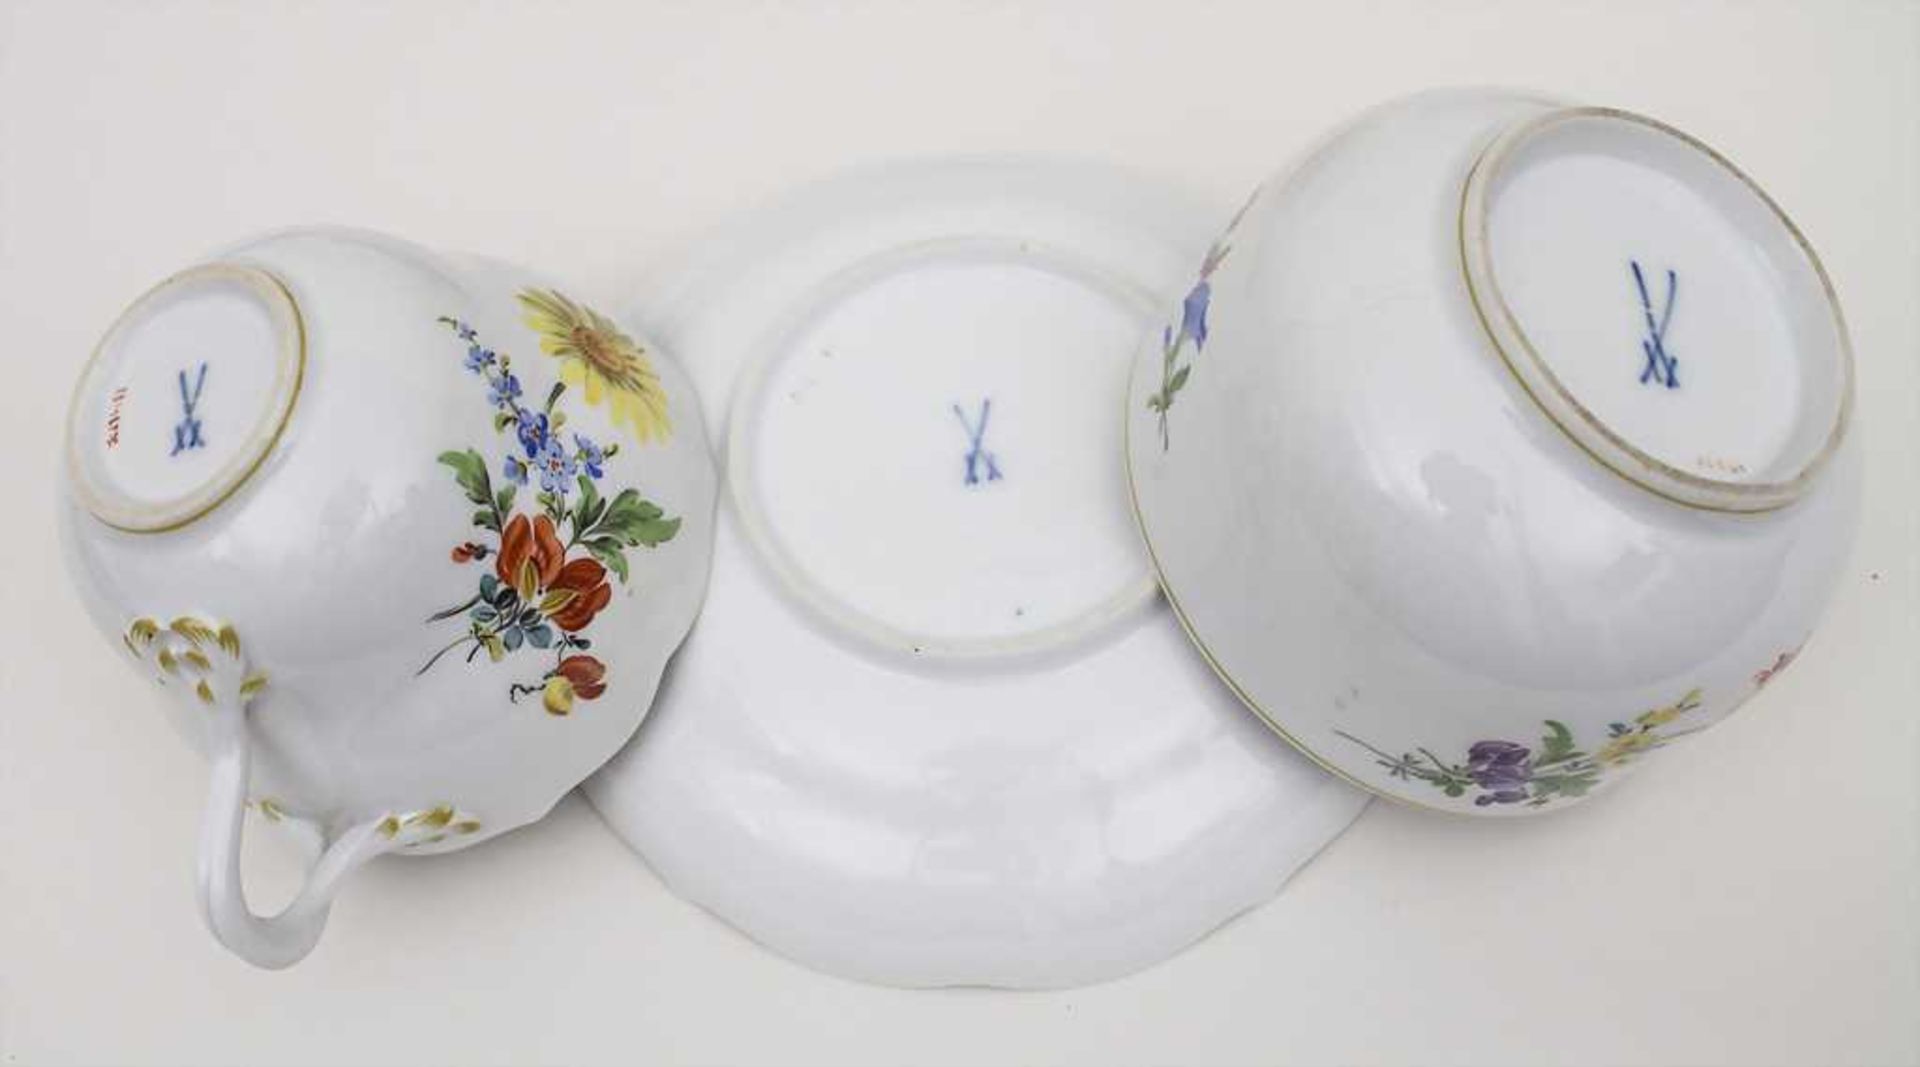 Kaffee- und Teeservice für 6 Pers. / Coffee and Tea Set for 6 Pers., Meissen, 20. Jh. Material: - Image 2 of 3